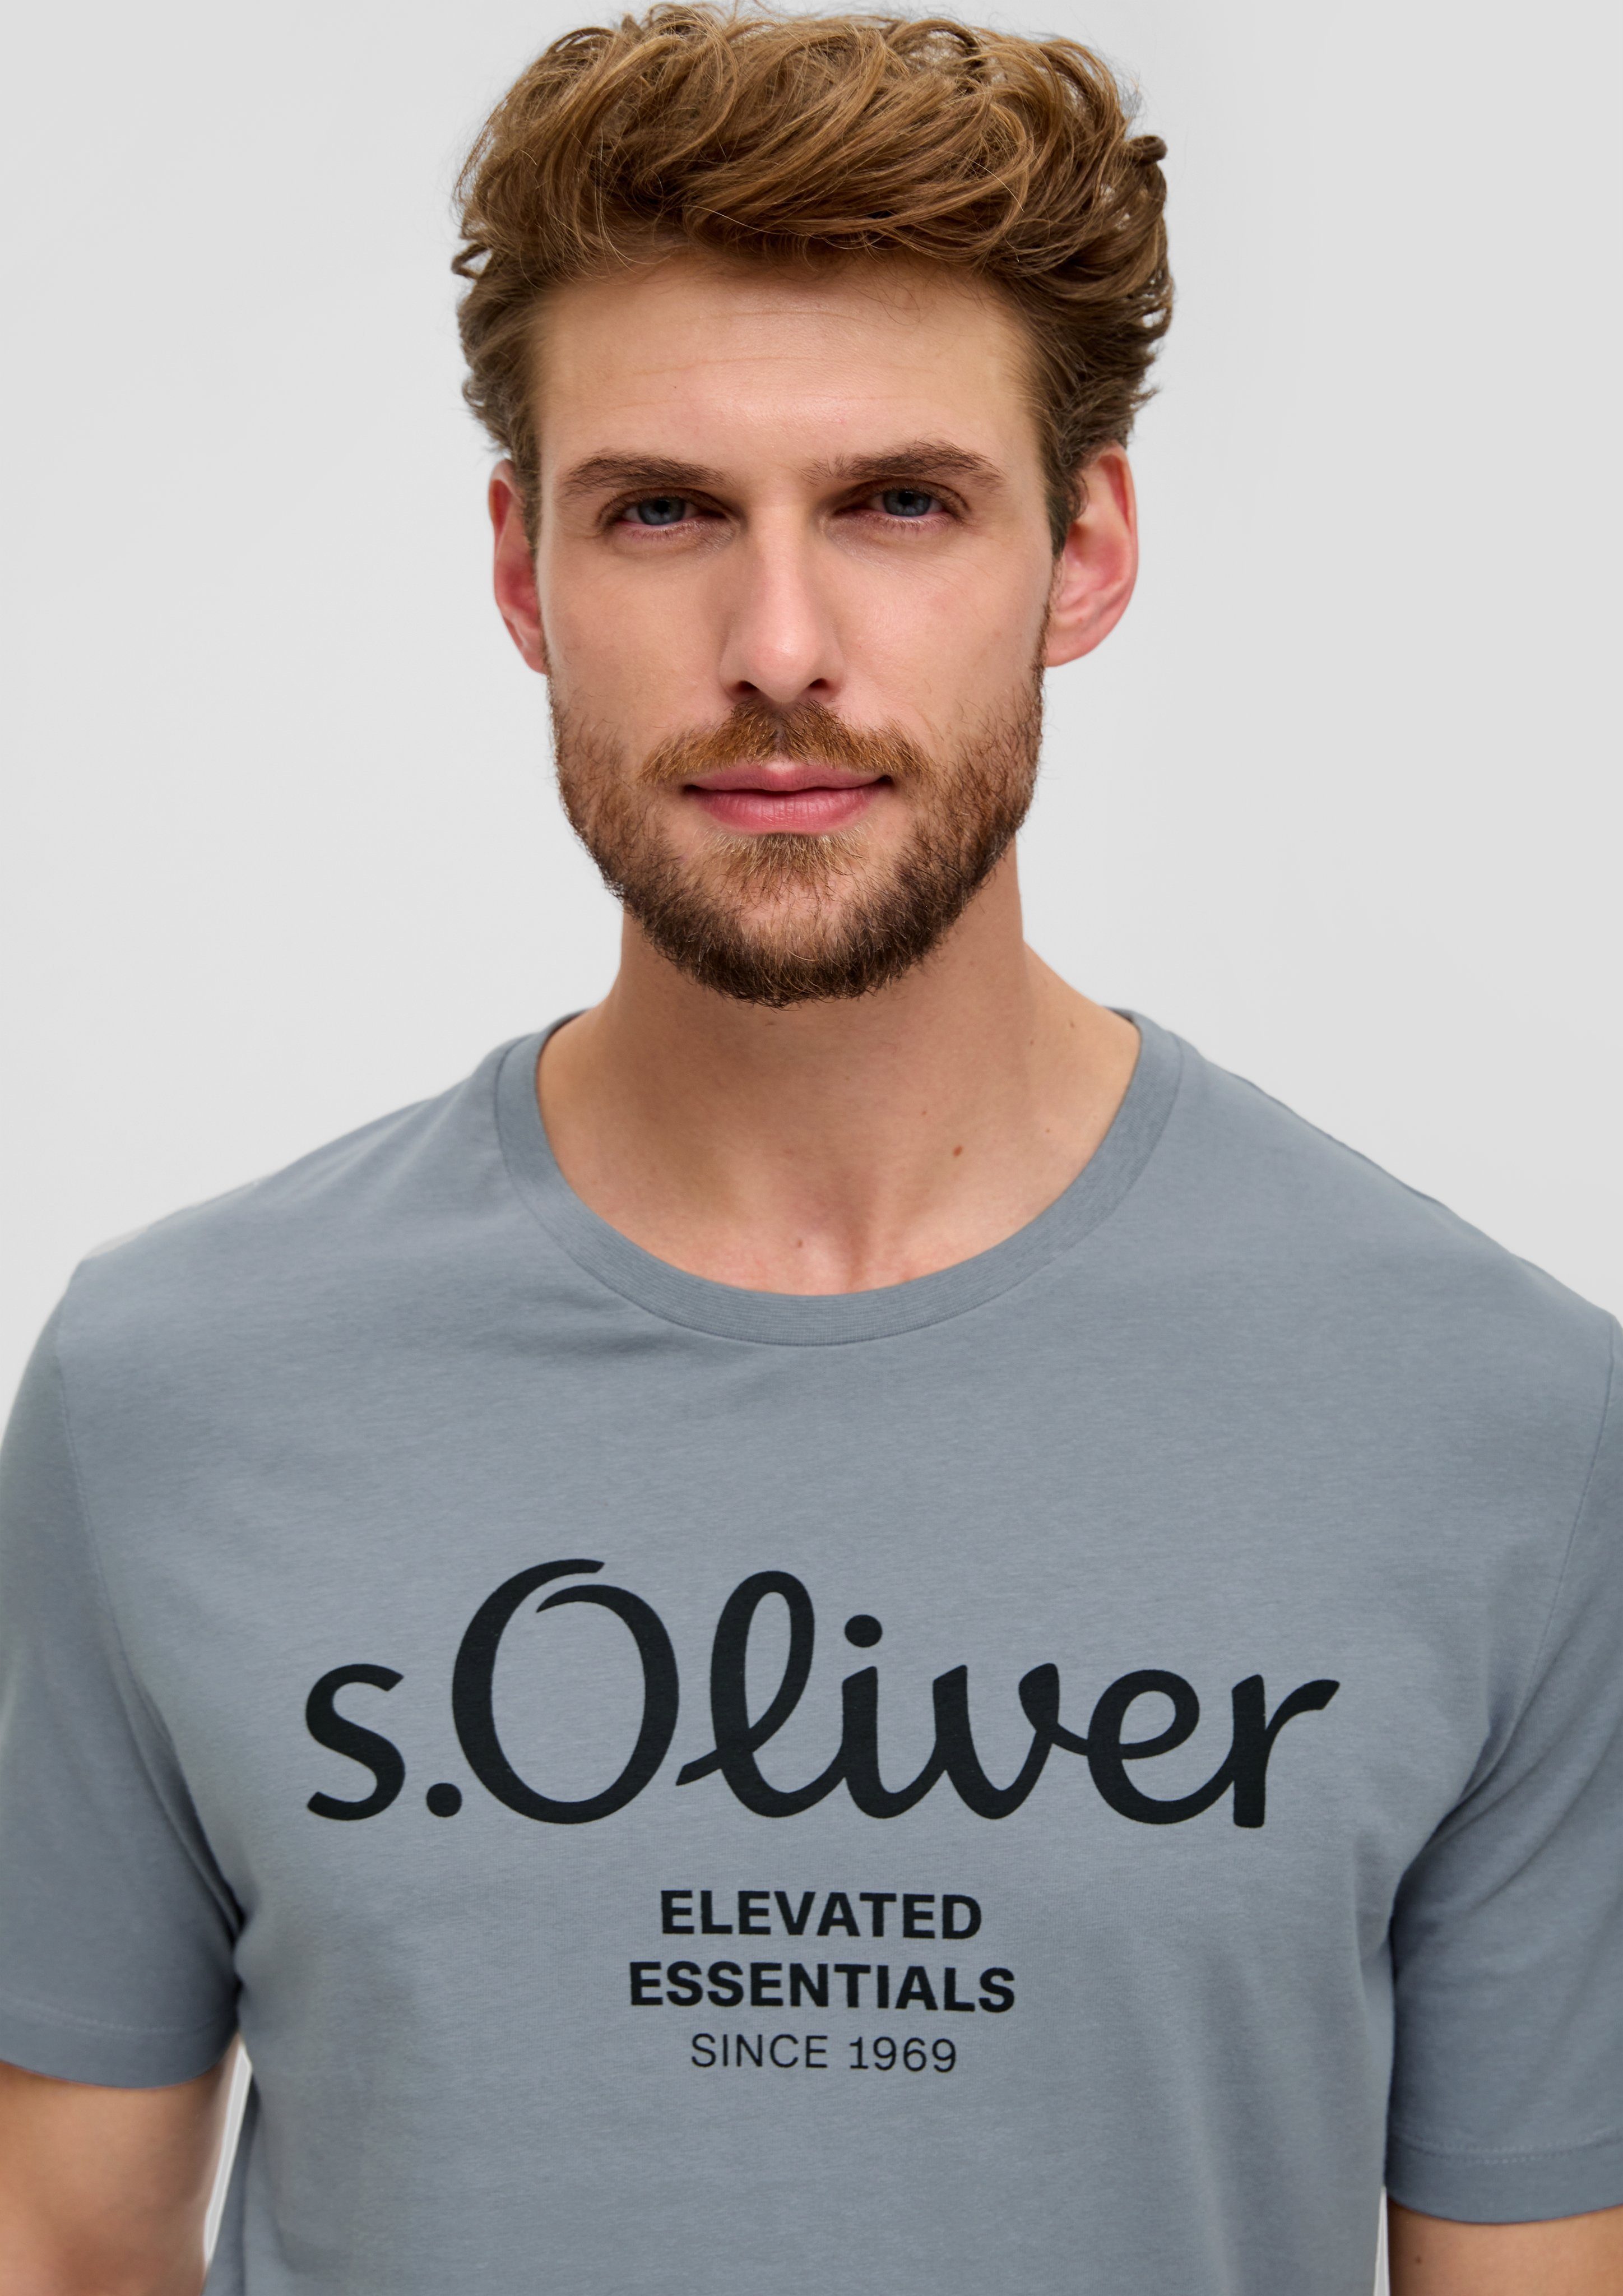 mid T-Shirt Look grey s.Oliver sportiven im